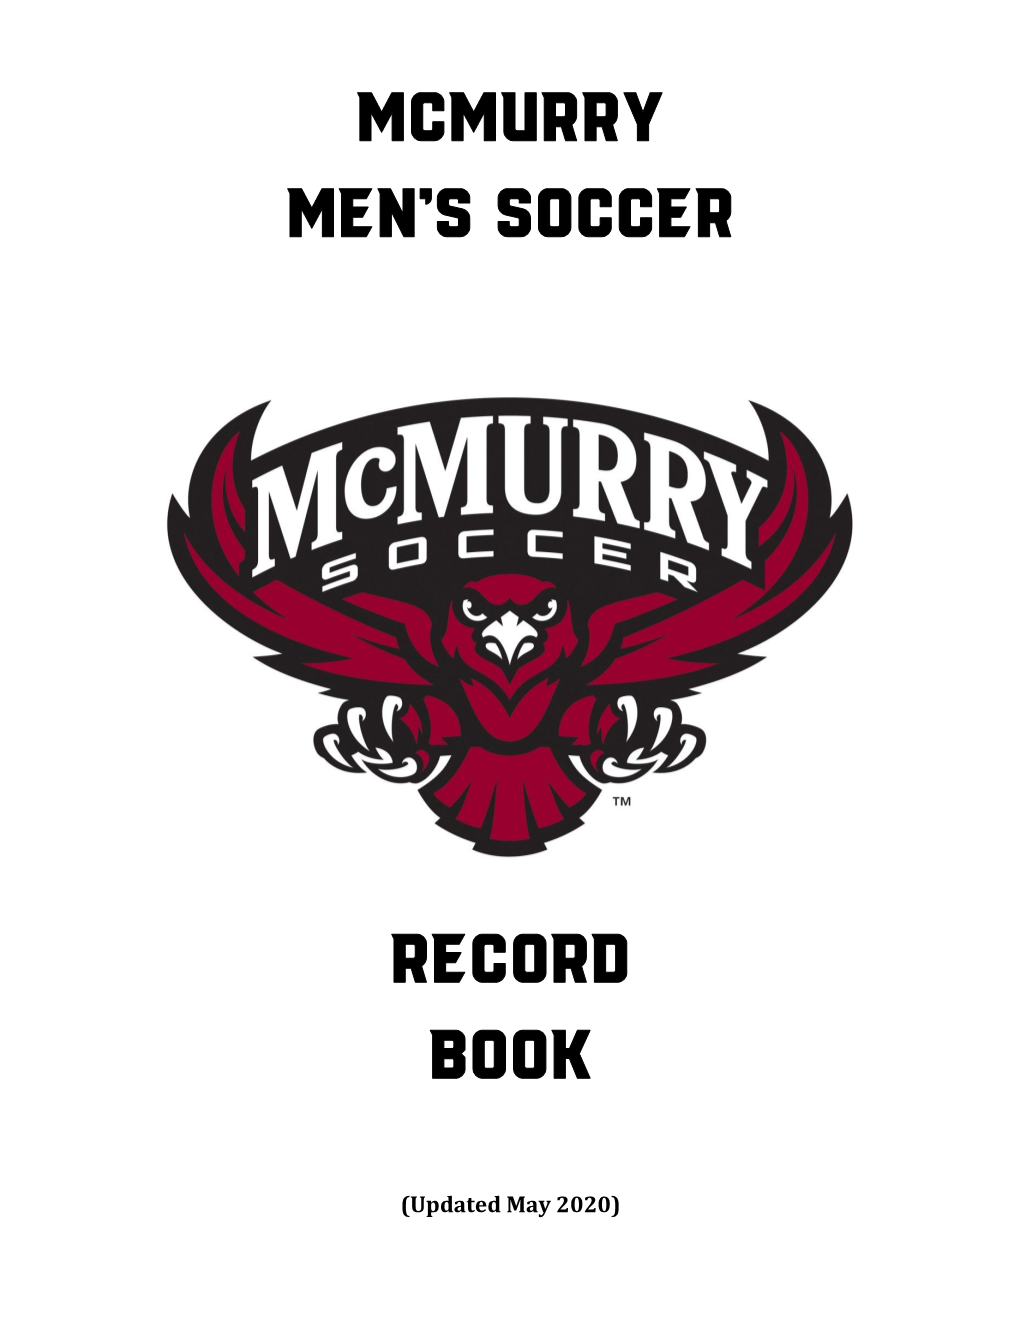 Mcmurry MEN's SOCCER RECORD BOOK